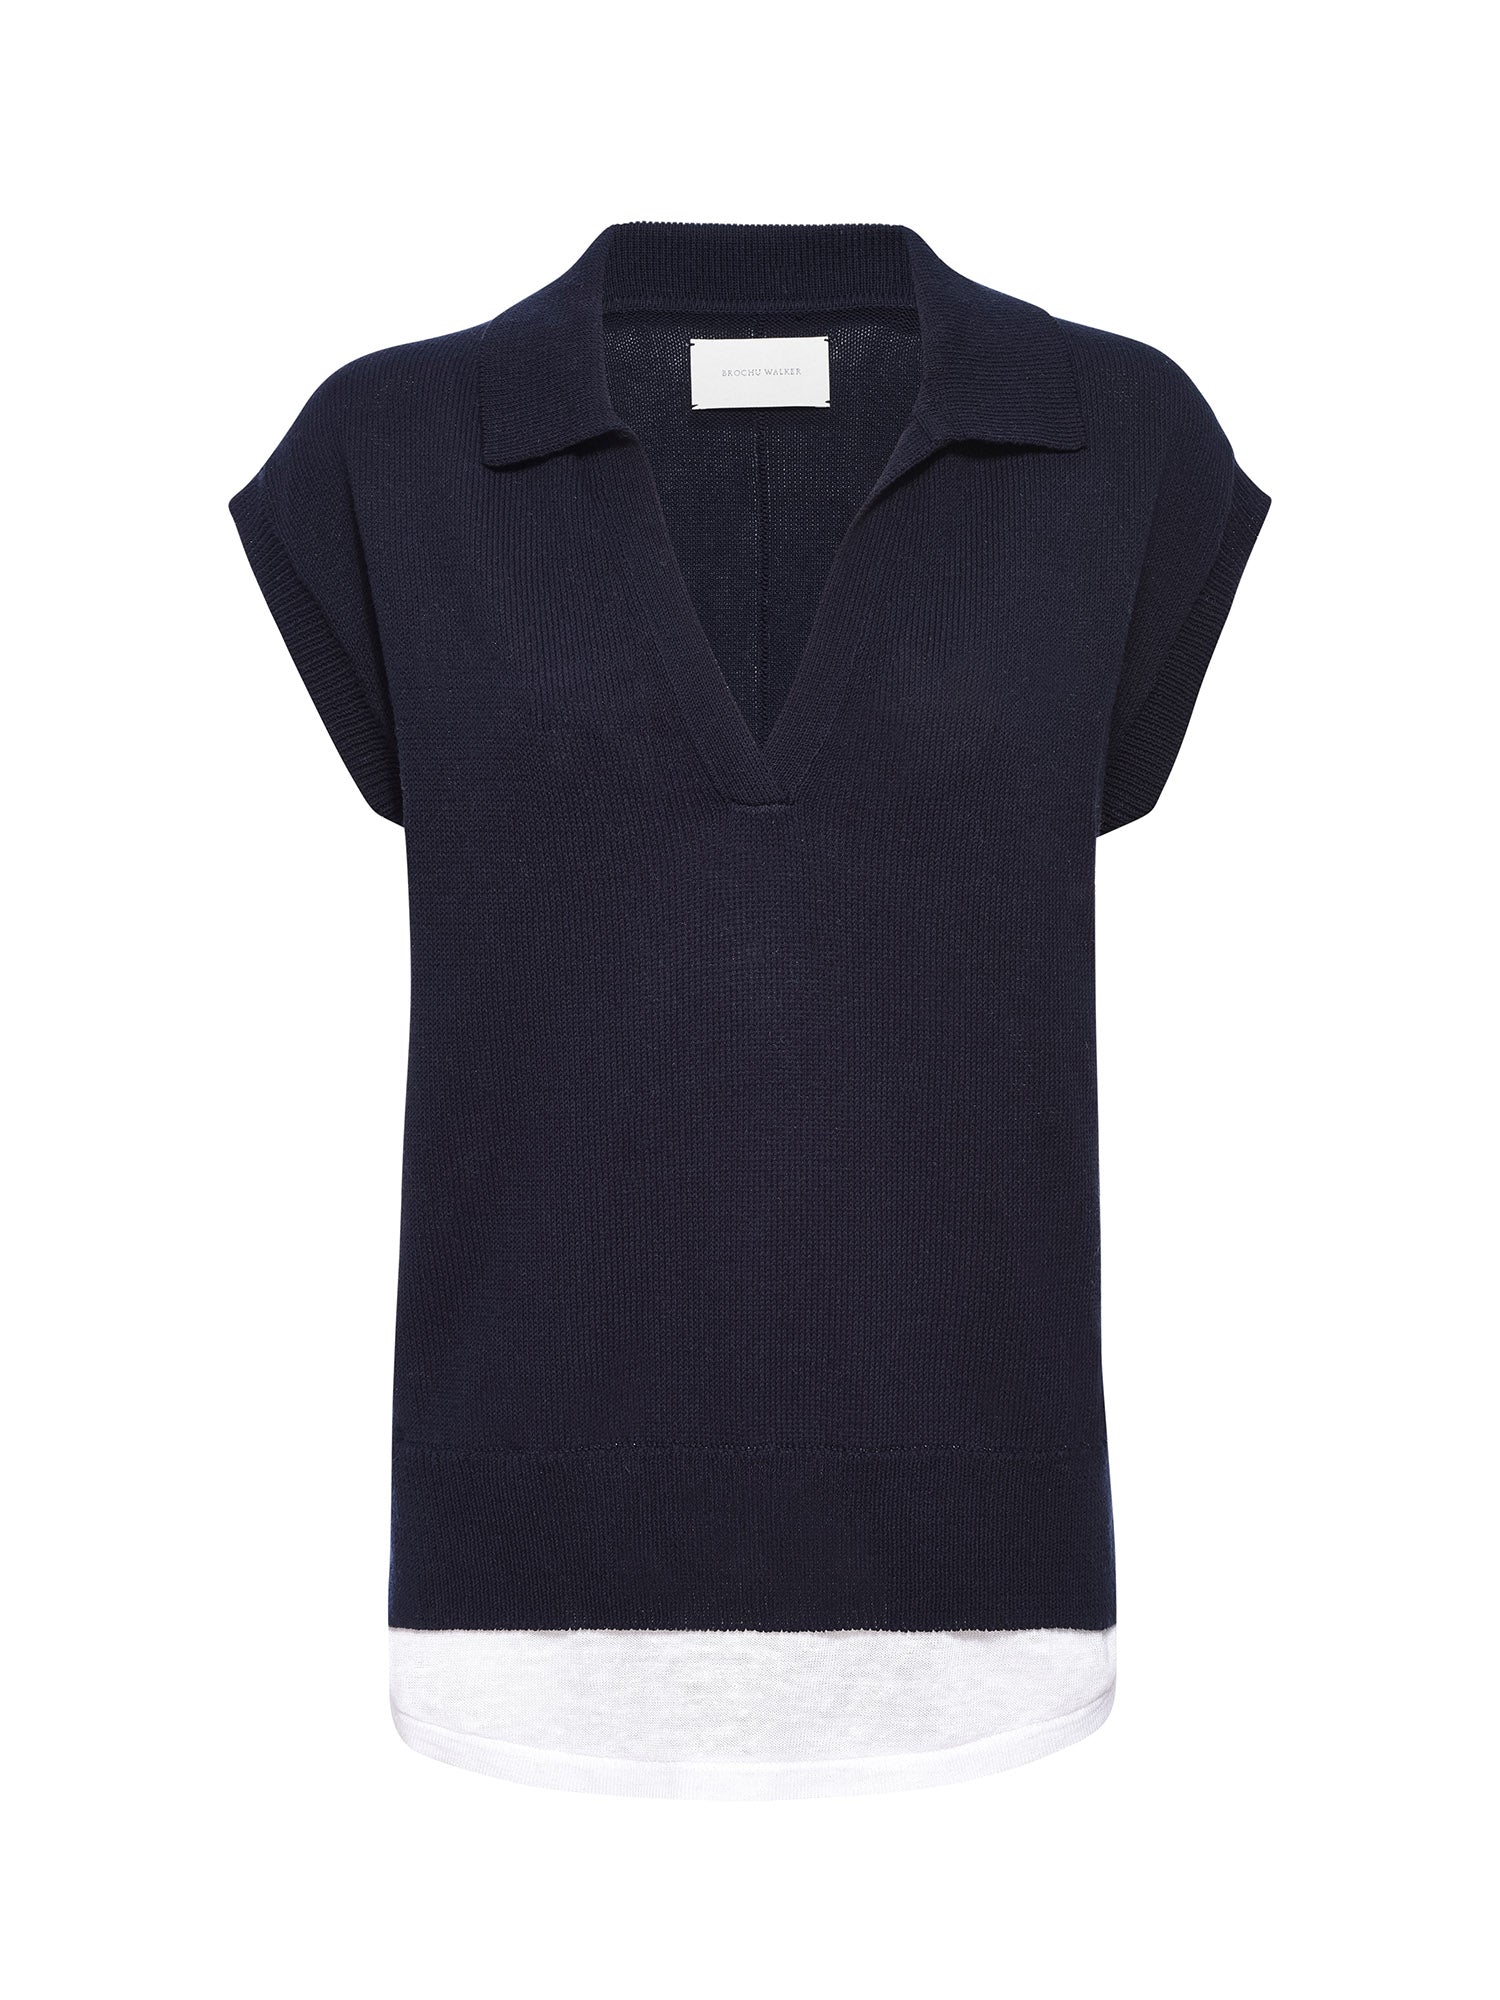 Women's Jaia Polo Looker in Hale Navy with White